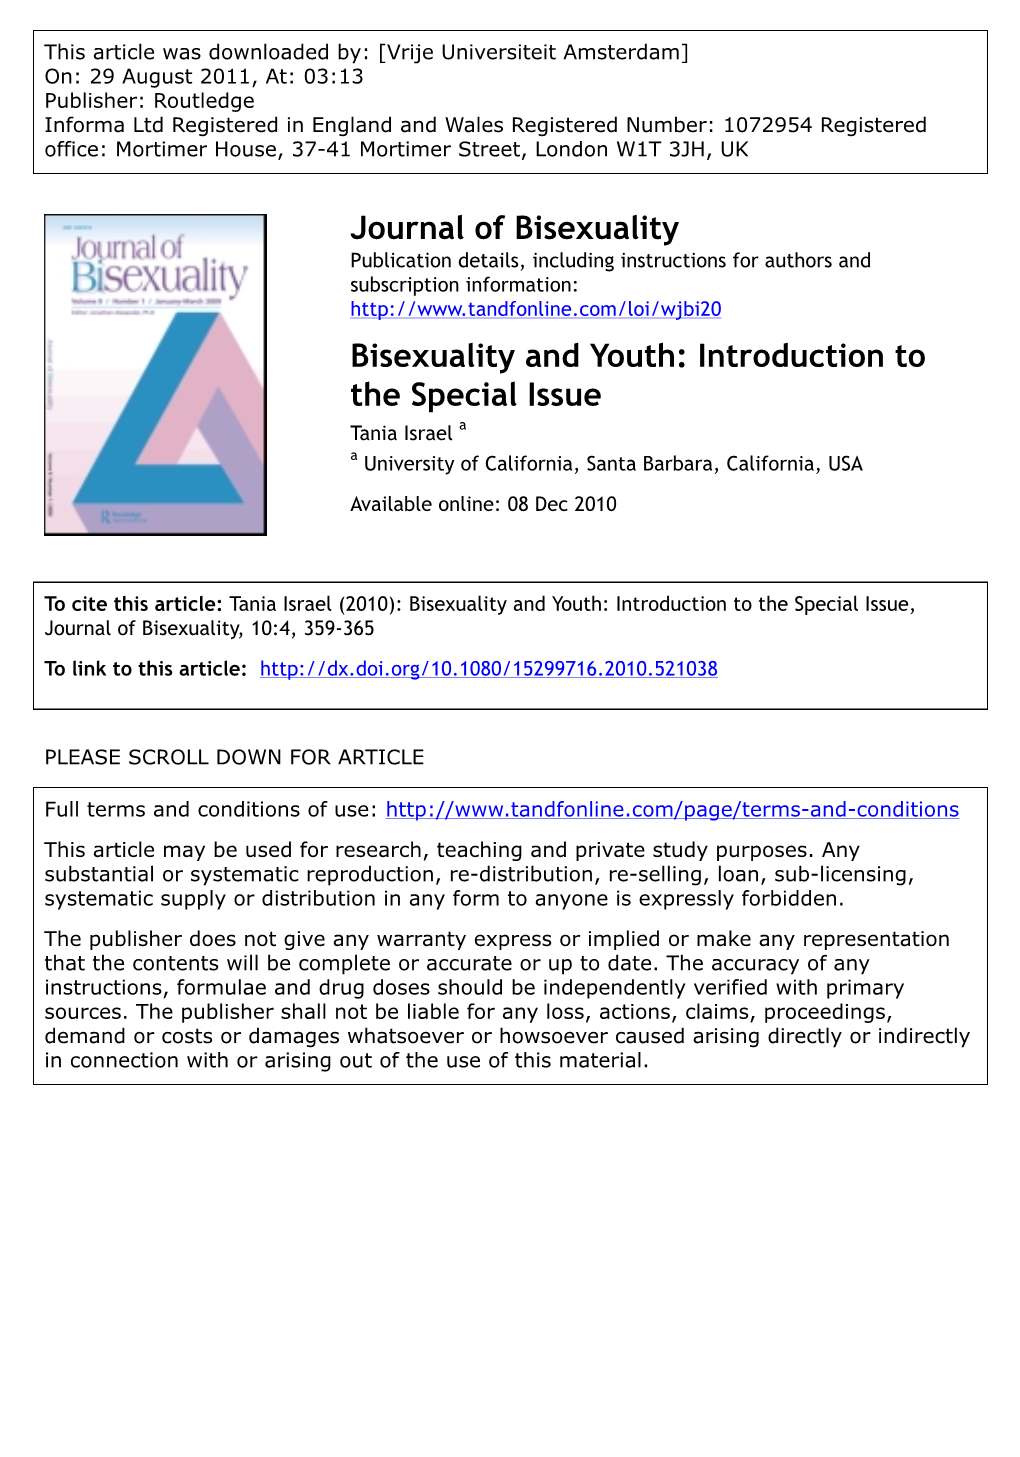 Bisexuality and Youth: Introduction to the Special Issue Tania Israel a a University of California, Santa Barbara, California, USA Available Online: 08 Dec 2010